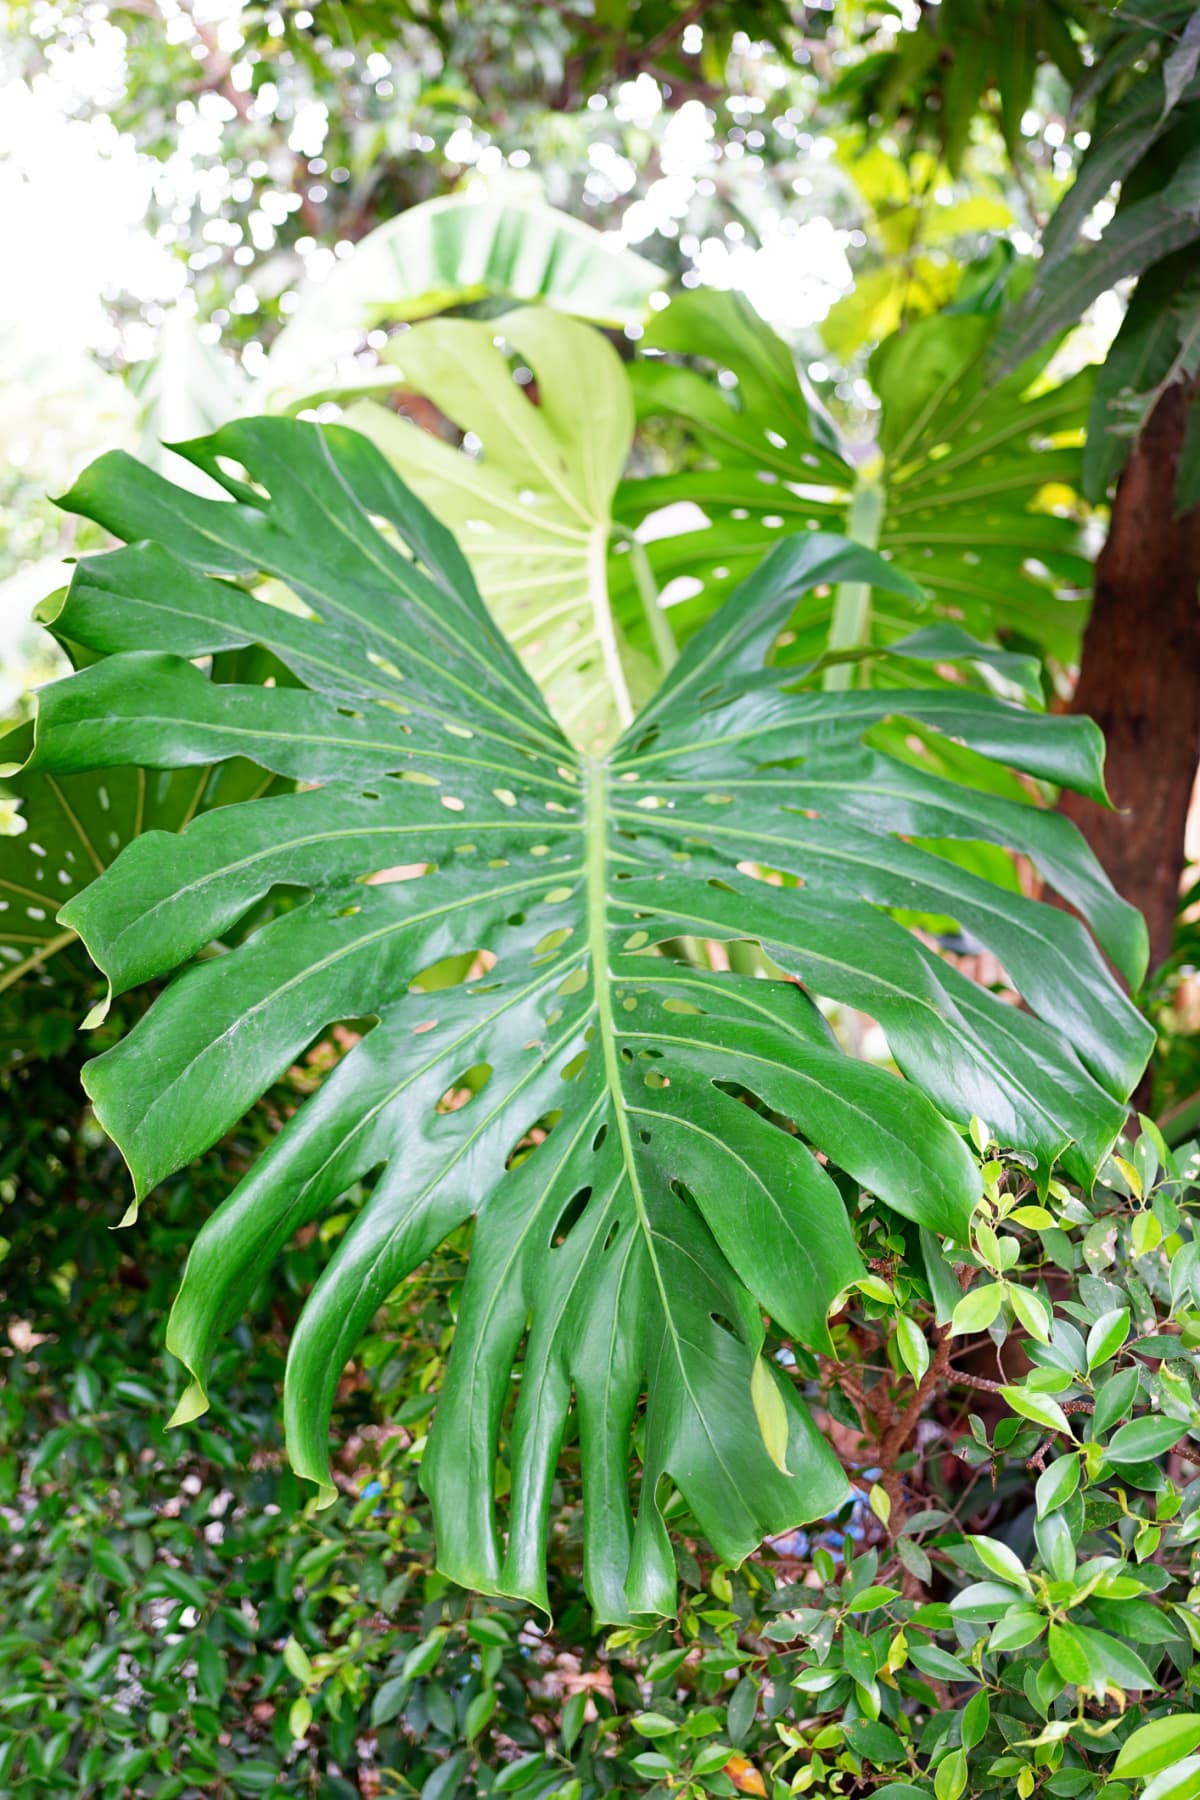 Monstera plant thriving in a lush garden